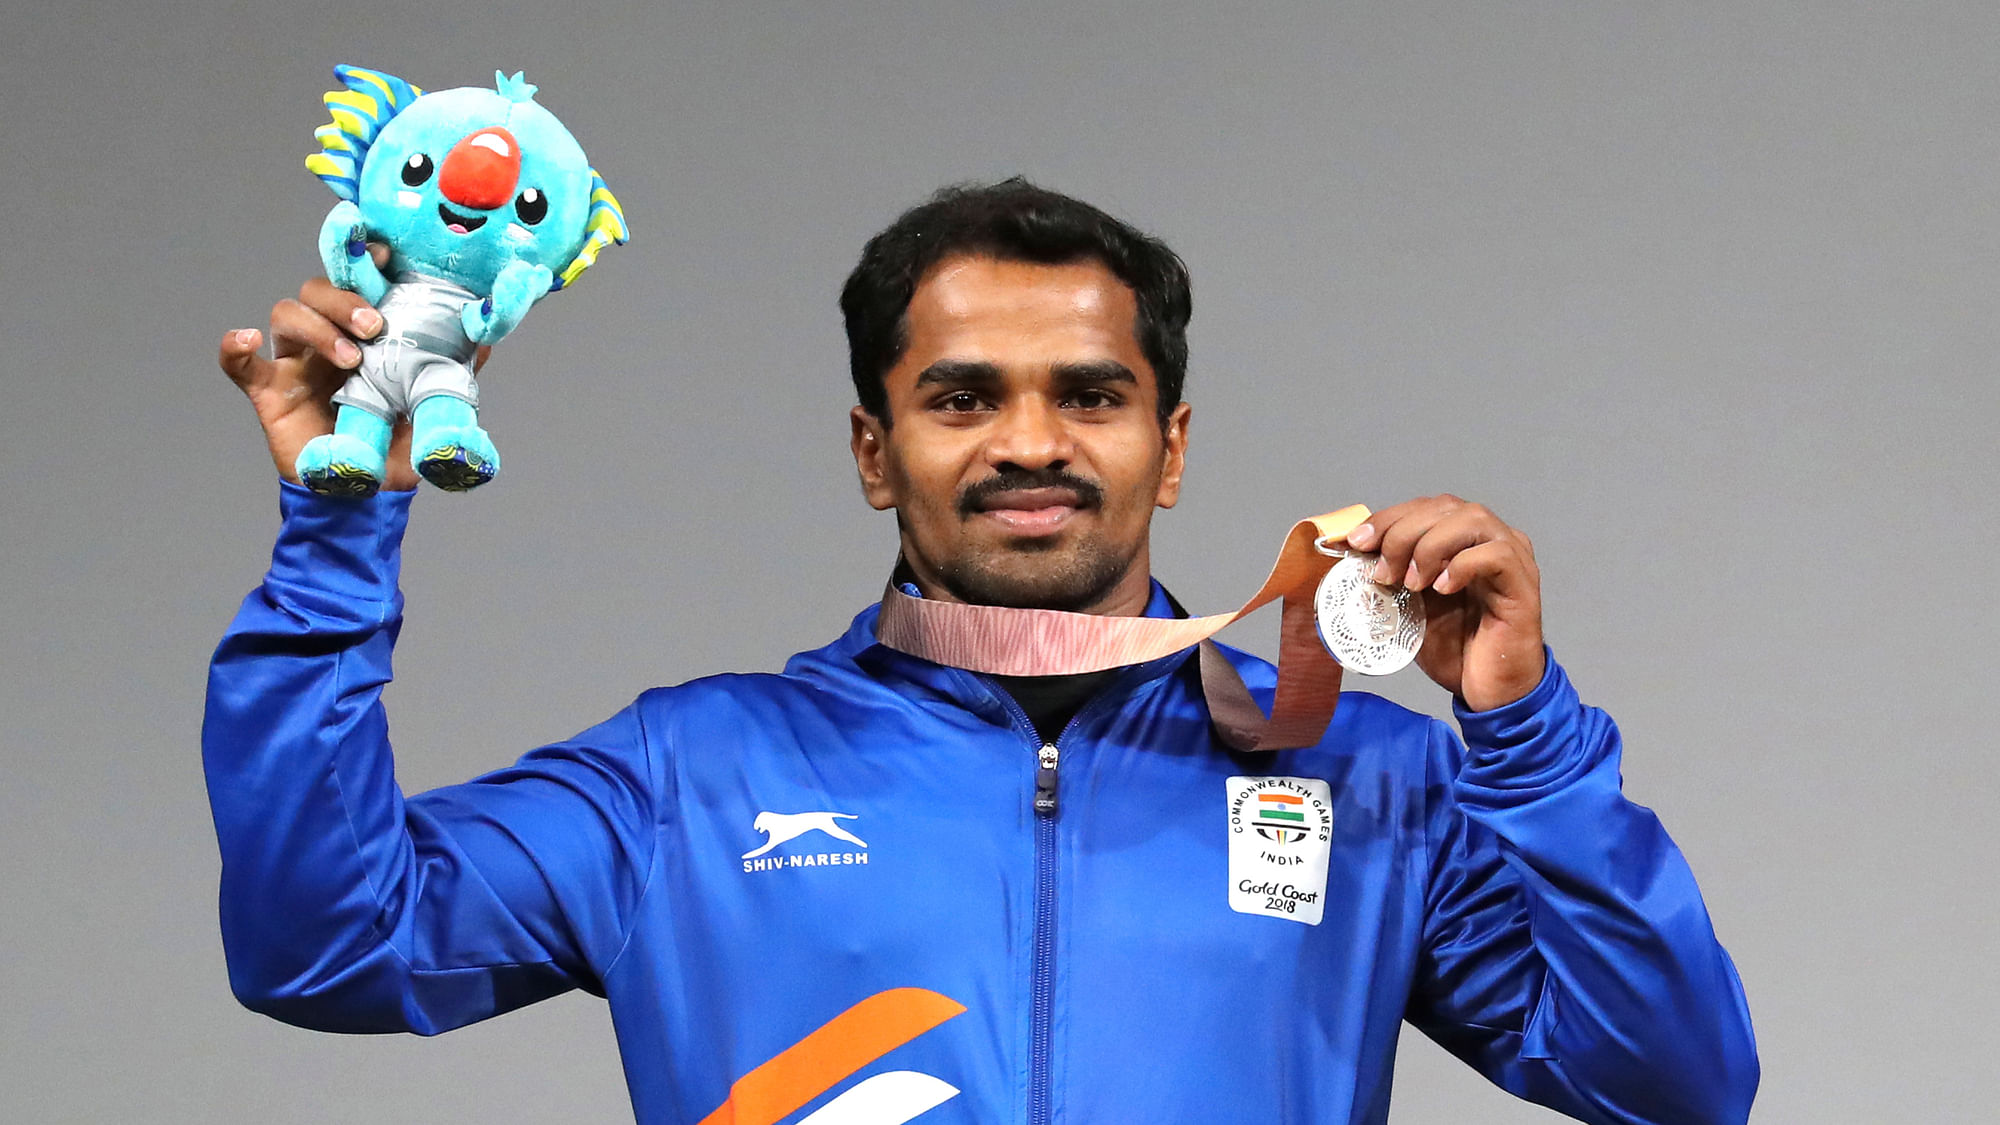 India’s Gururaja shows his Silver medal and mascot Borbi after wining in the Men’s 56kg Weightlifting final during Commonwealth Games in Gold Coast, Australia, Thursday, April 5, 2018.&nbsp;